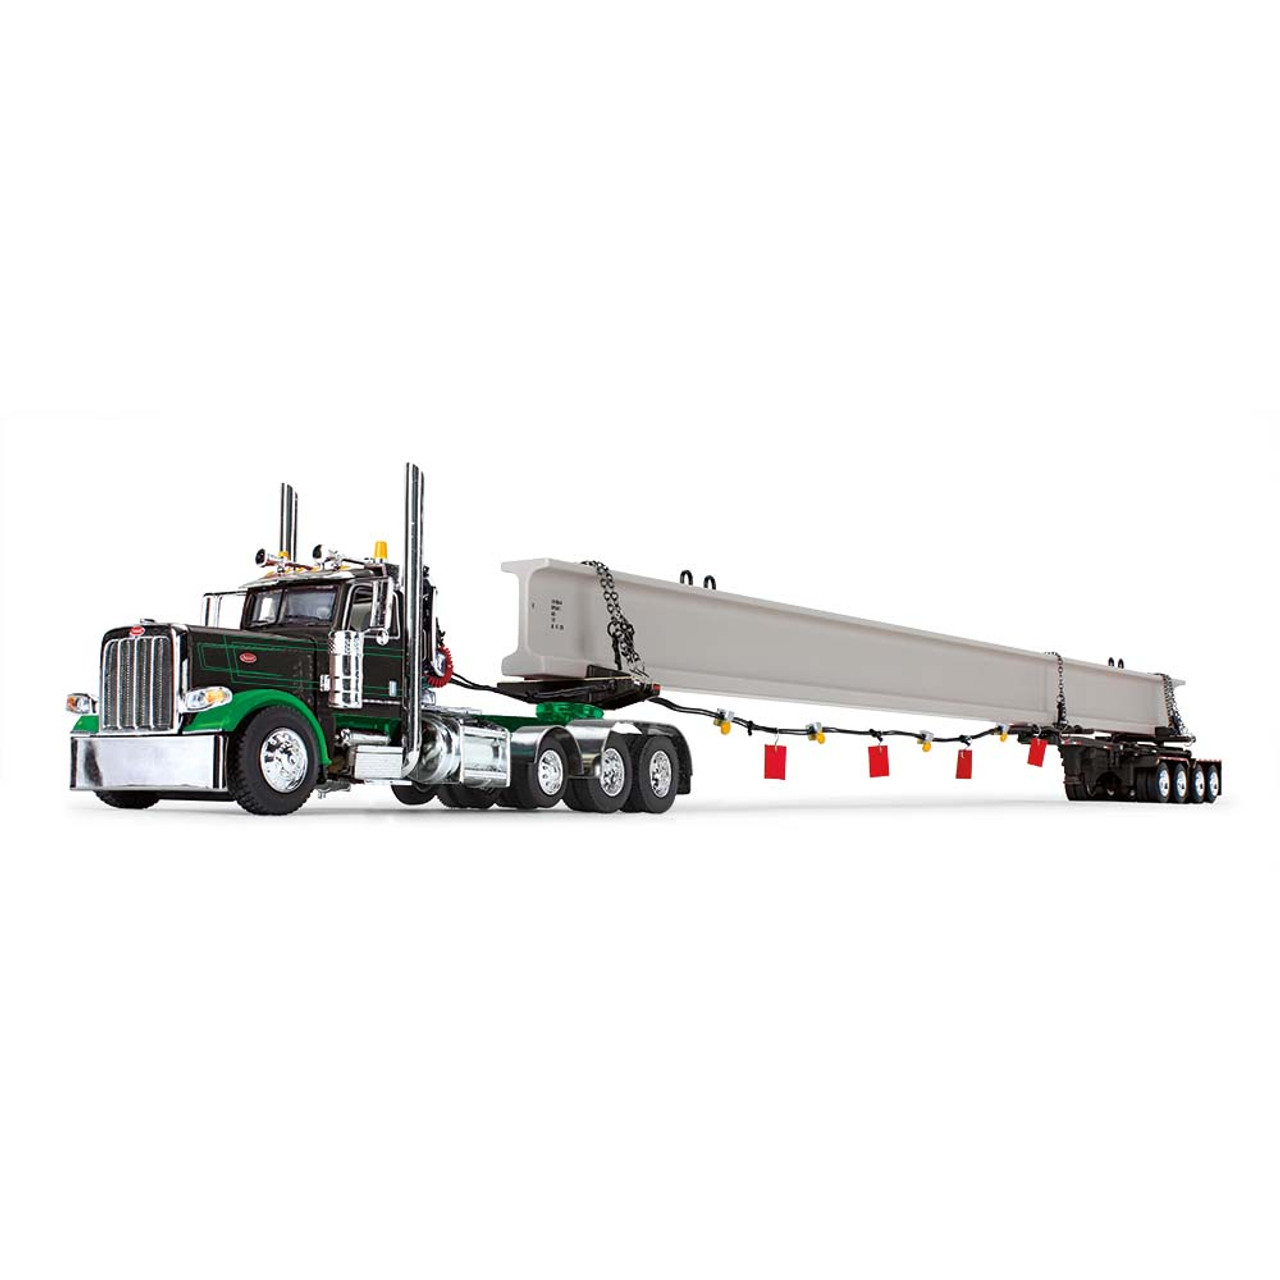 60-1673  1/64  Black/Green  Peterbilt® Model 389 Day Cab & ERMC 4-Axle Hydra-Steer Trailer with Bridge Beam Section Load